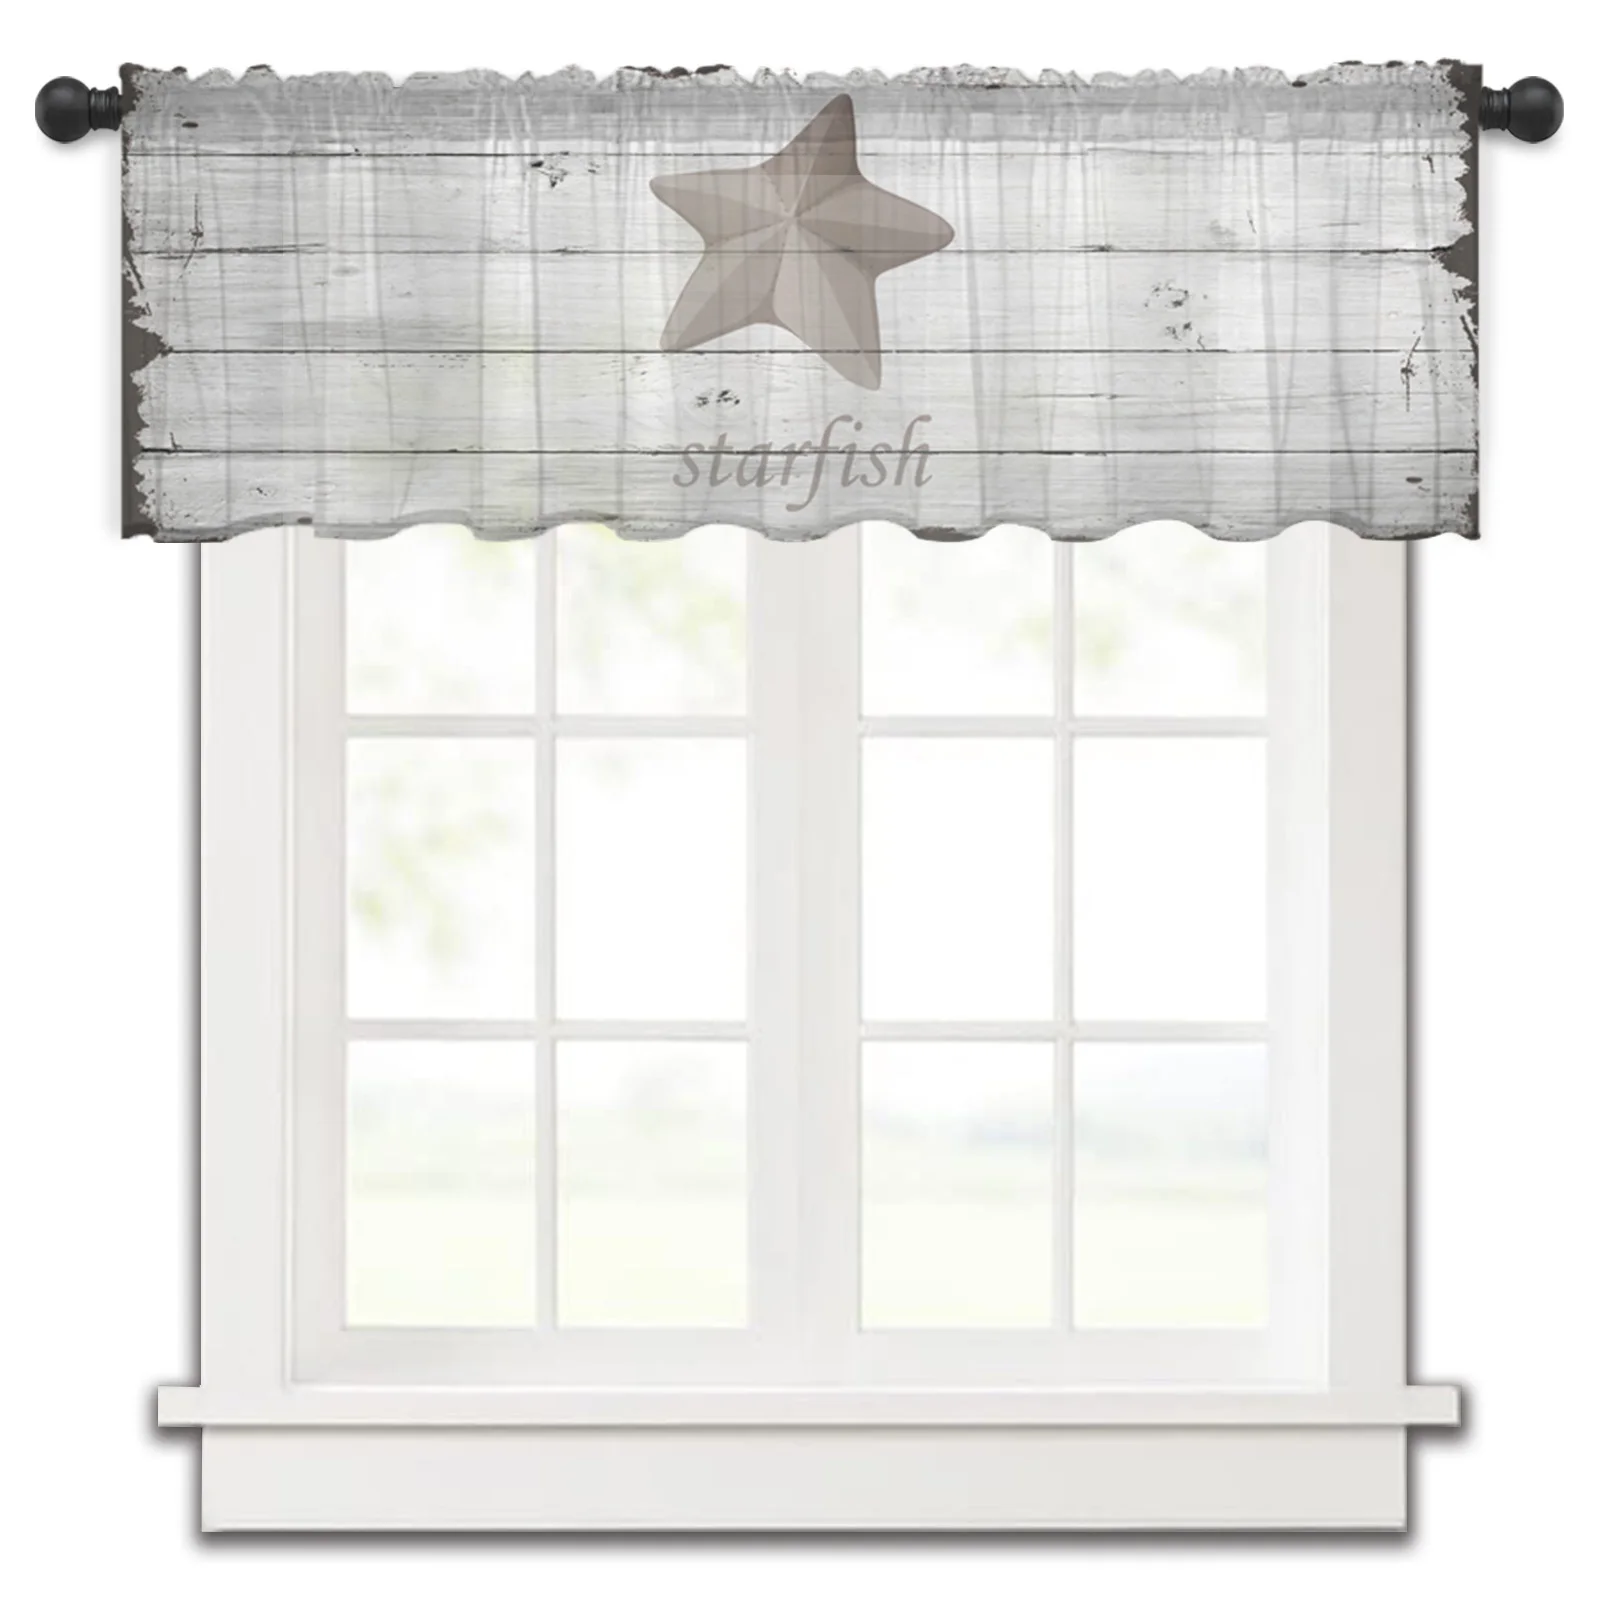 

Wood Grain Starfish Retro Kitchen Small Window Curtain Tulle Sheer Short Curtain Bedroom Living Room Home Decor Voile Drapes